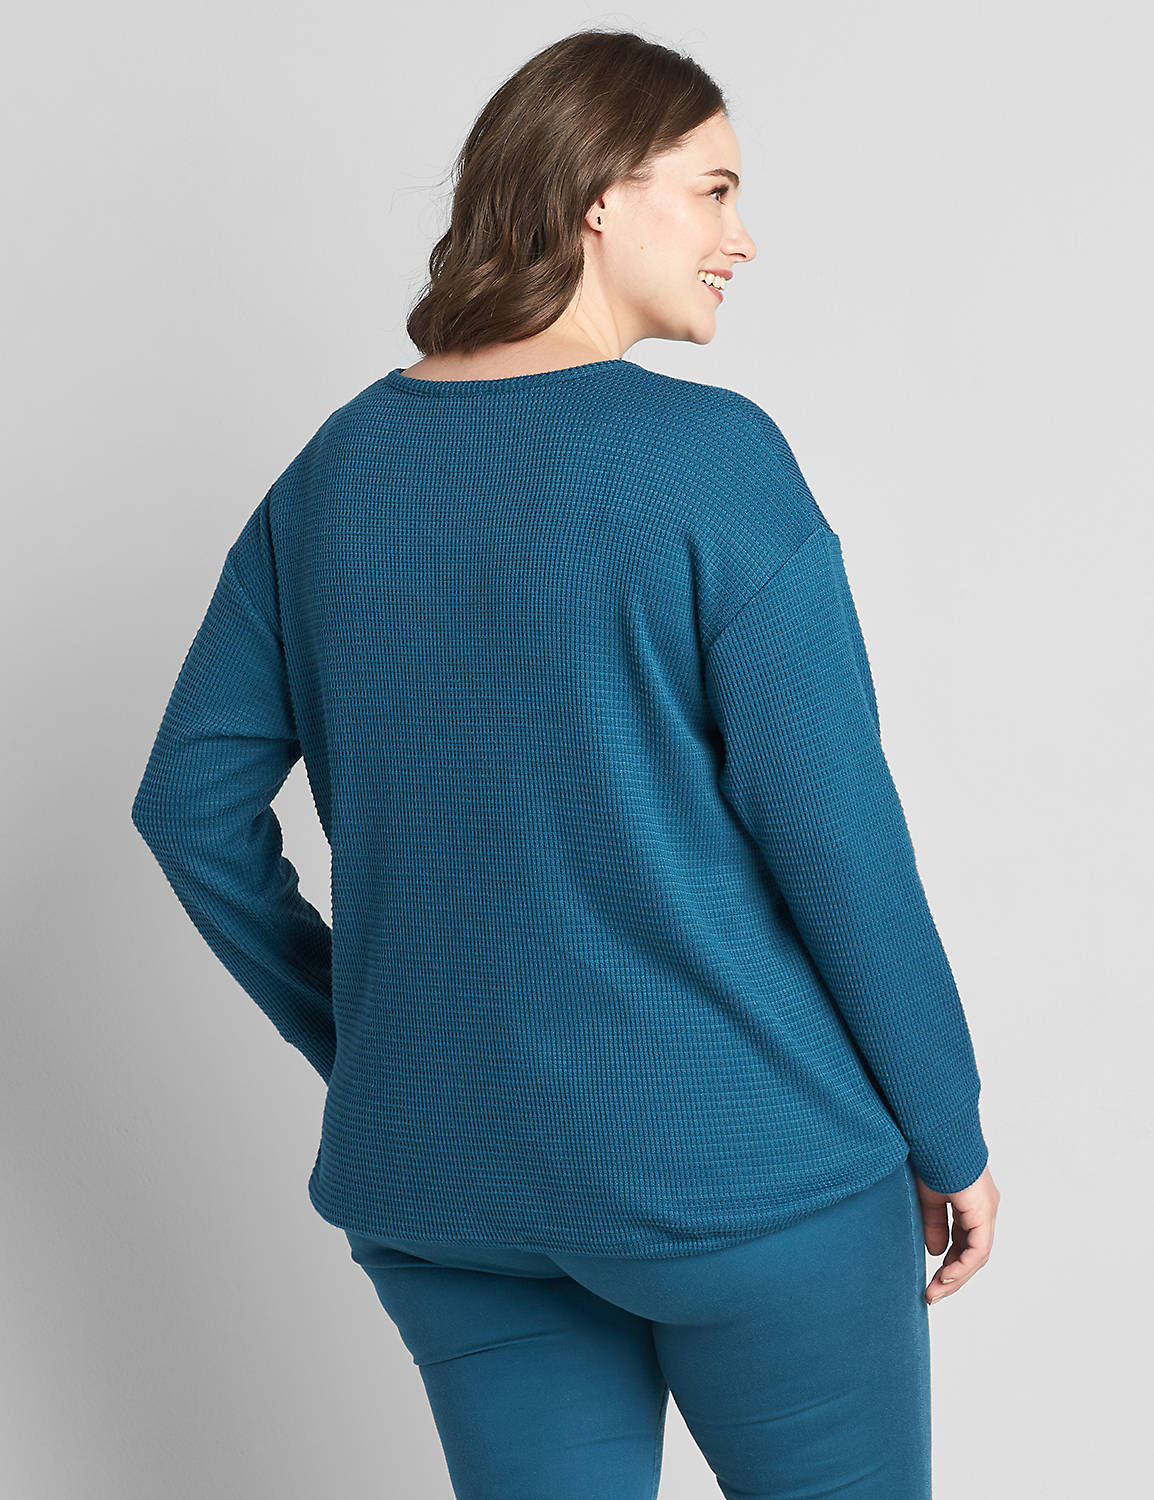 Henley Knit Top With Drawstring Hem Product Image 2